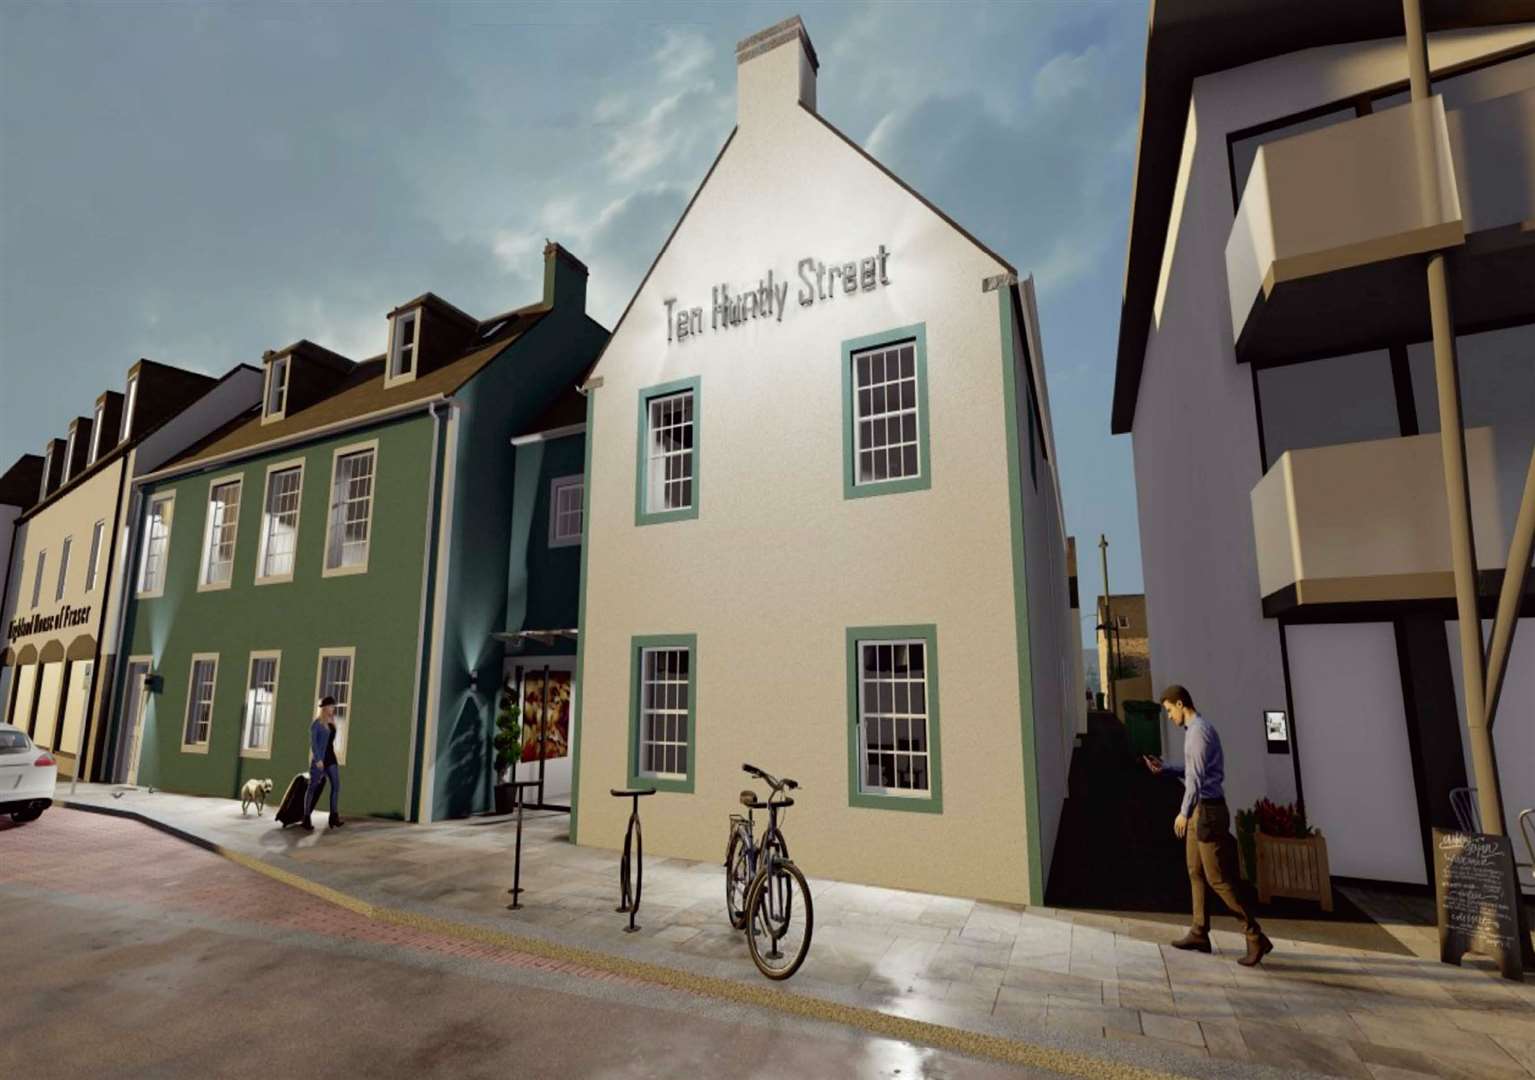 Image of proposed Huntly Street hotel.